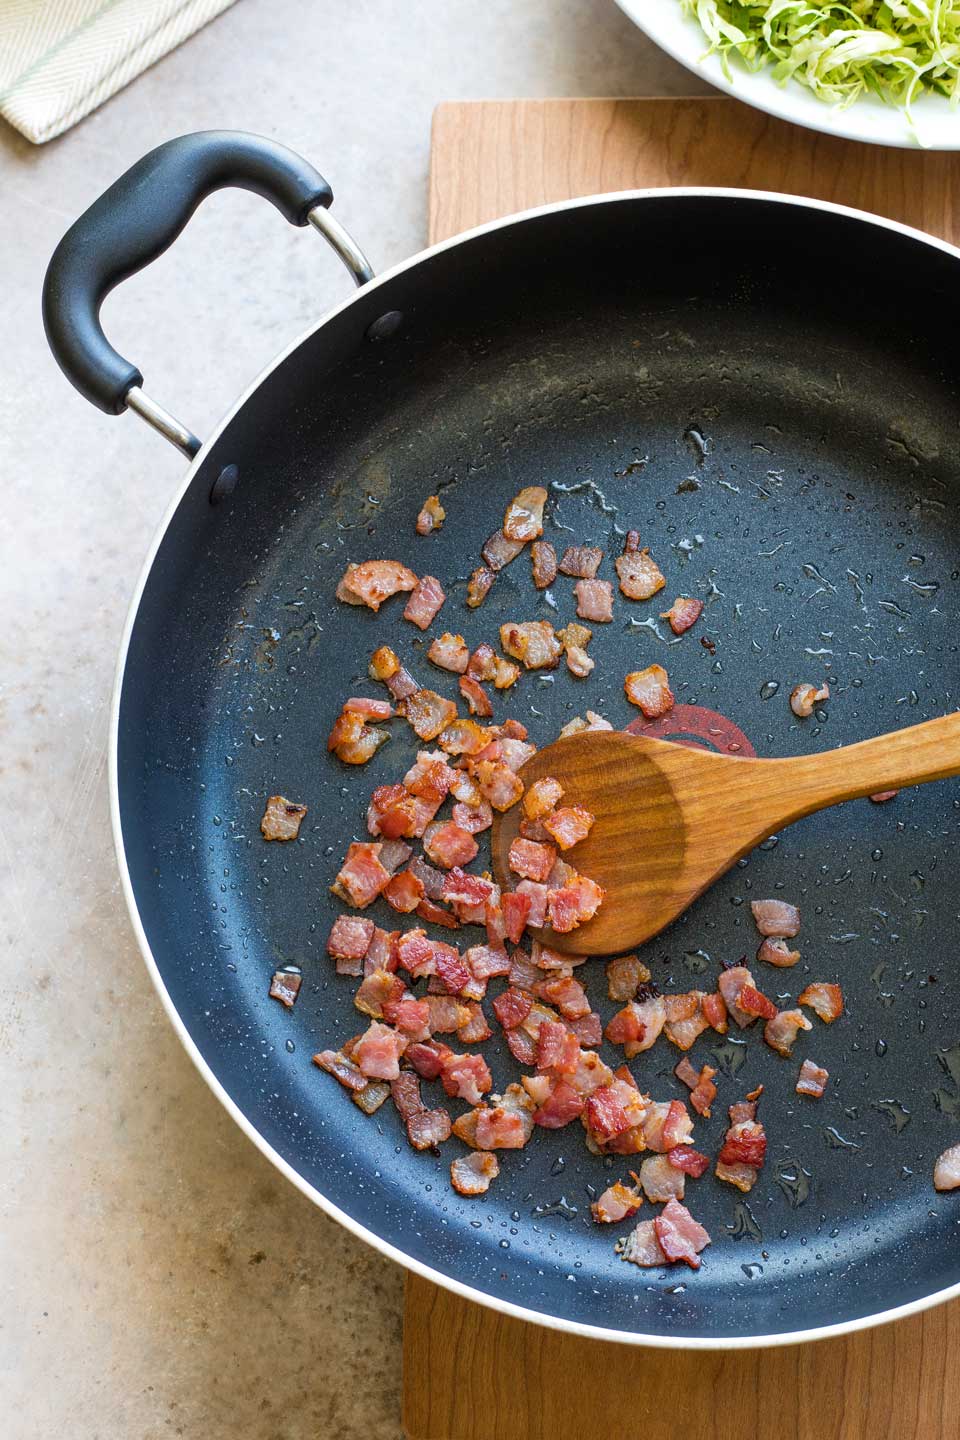 Sauteed bacon in pan being stirred with wooden spoon.